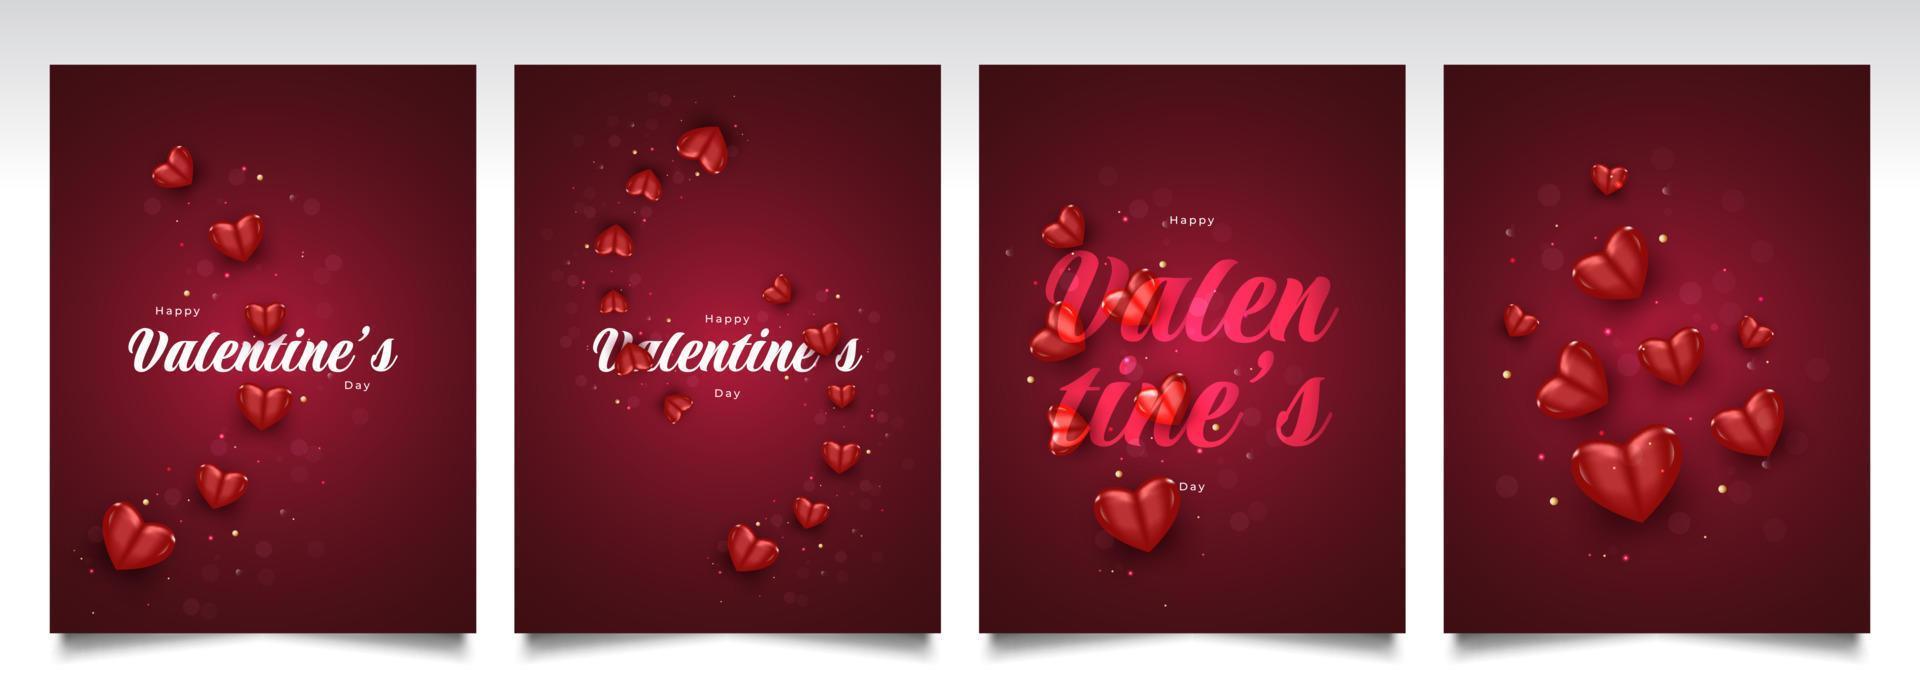 Valentine's Day Card or Poster Design with 3D Red Heart Illustration. Happy Valentine's Day Typography vector